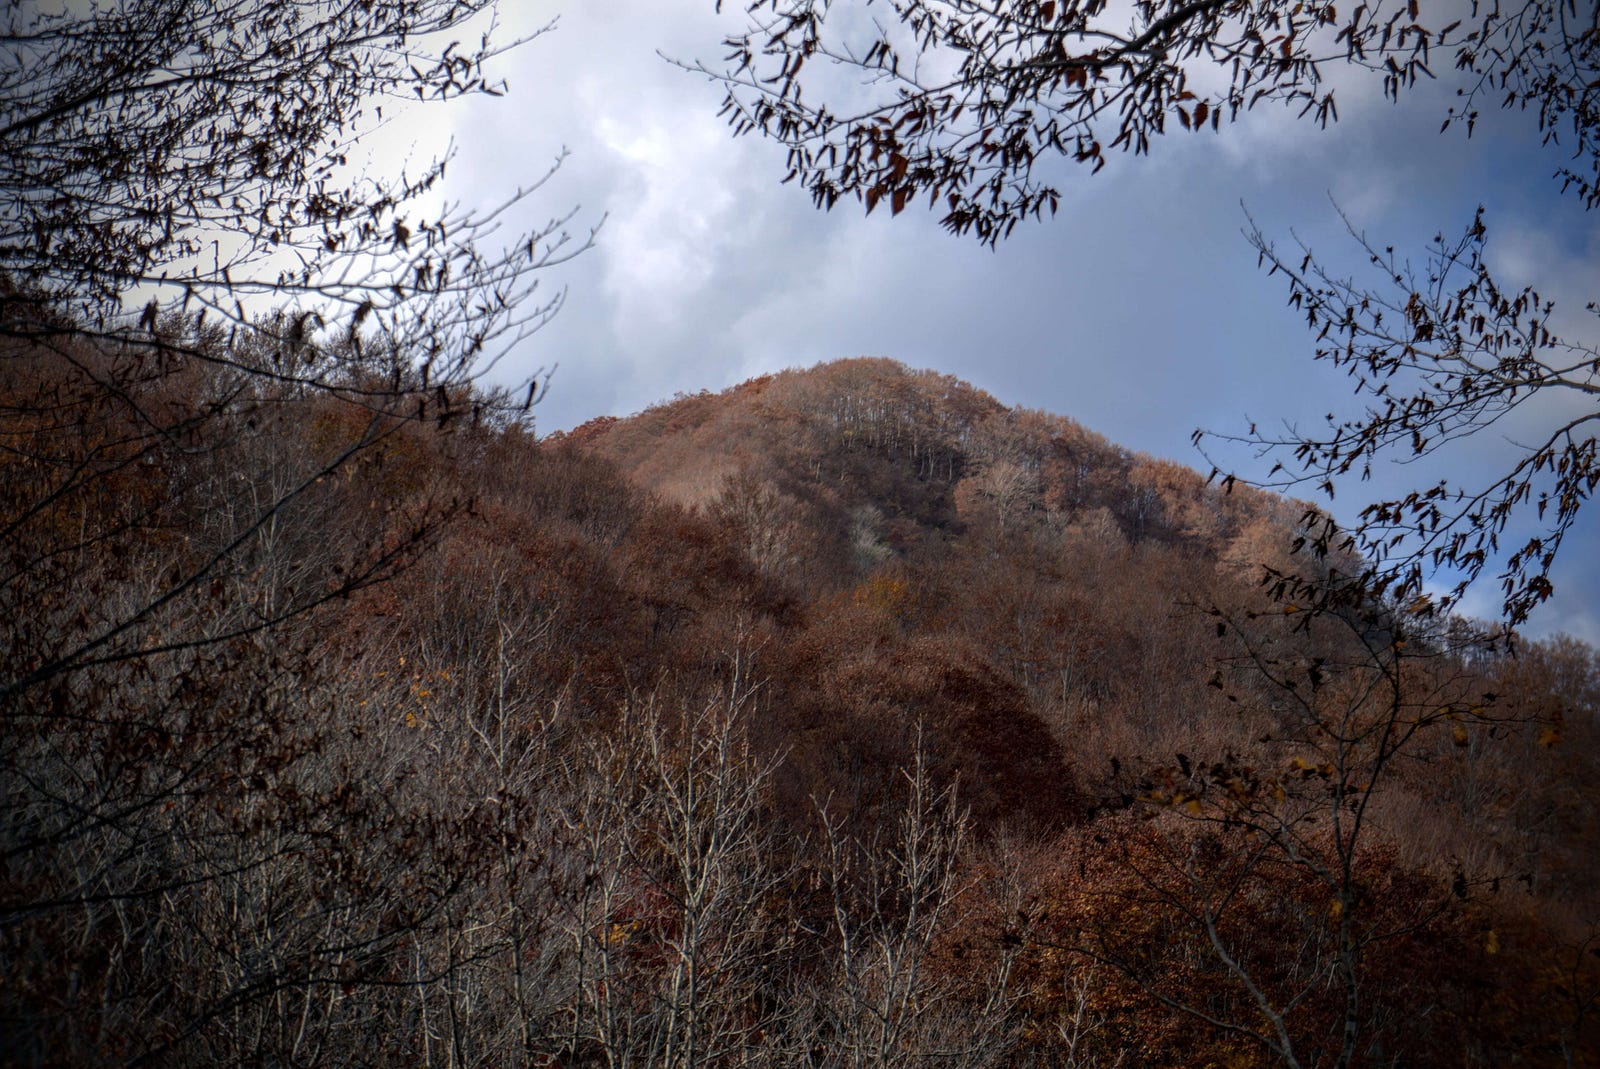 A close-up of the summit of Mt. Hokari, featuring bald trees of brown about to completely lose their leaves